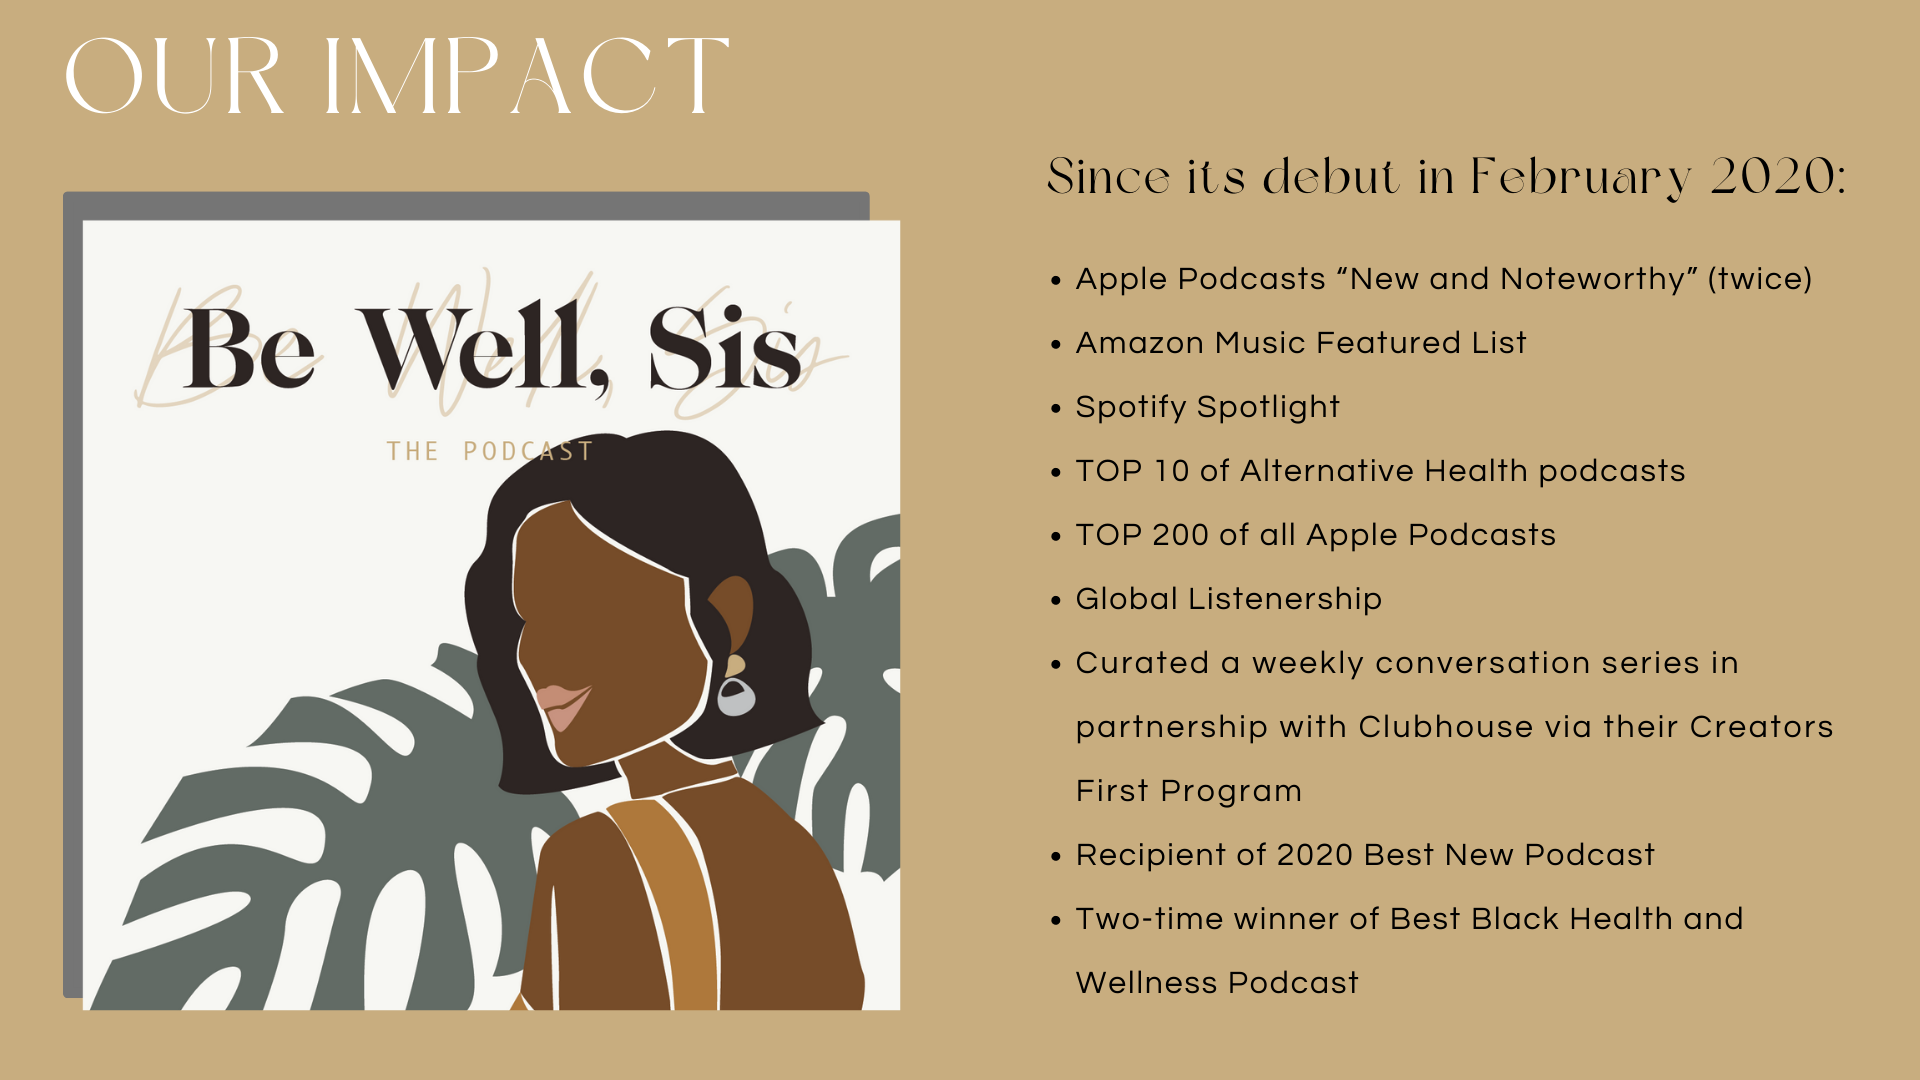 The impact of the Be Well, Sis podcast